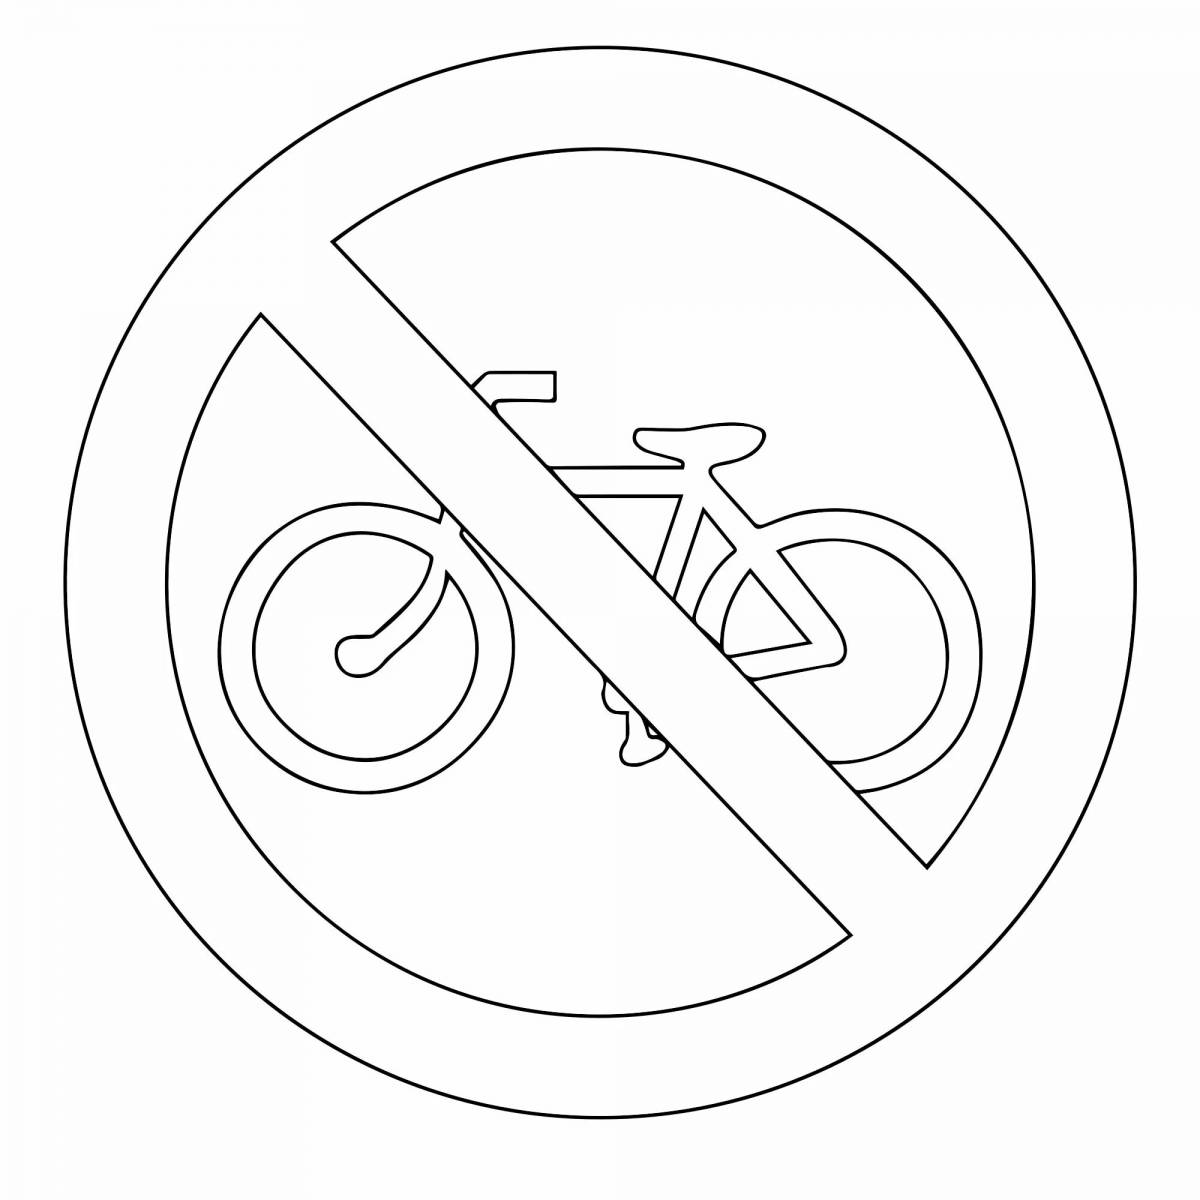 Fascinating No Bicycle Coloring Page